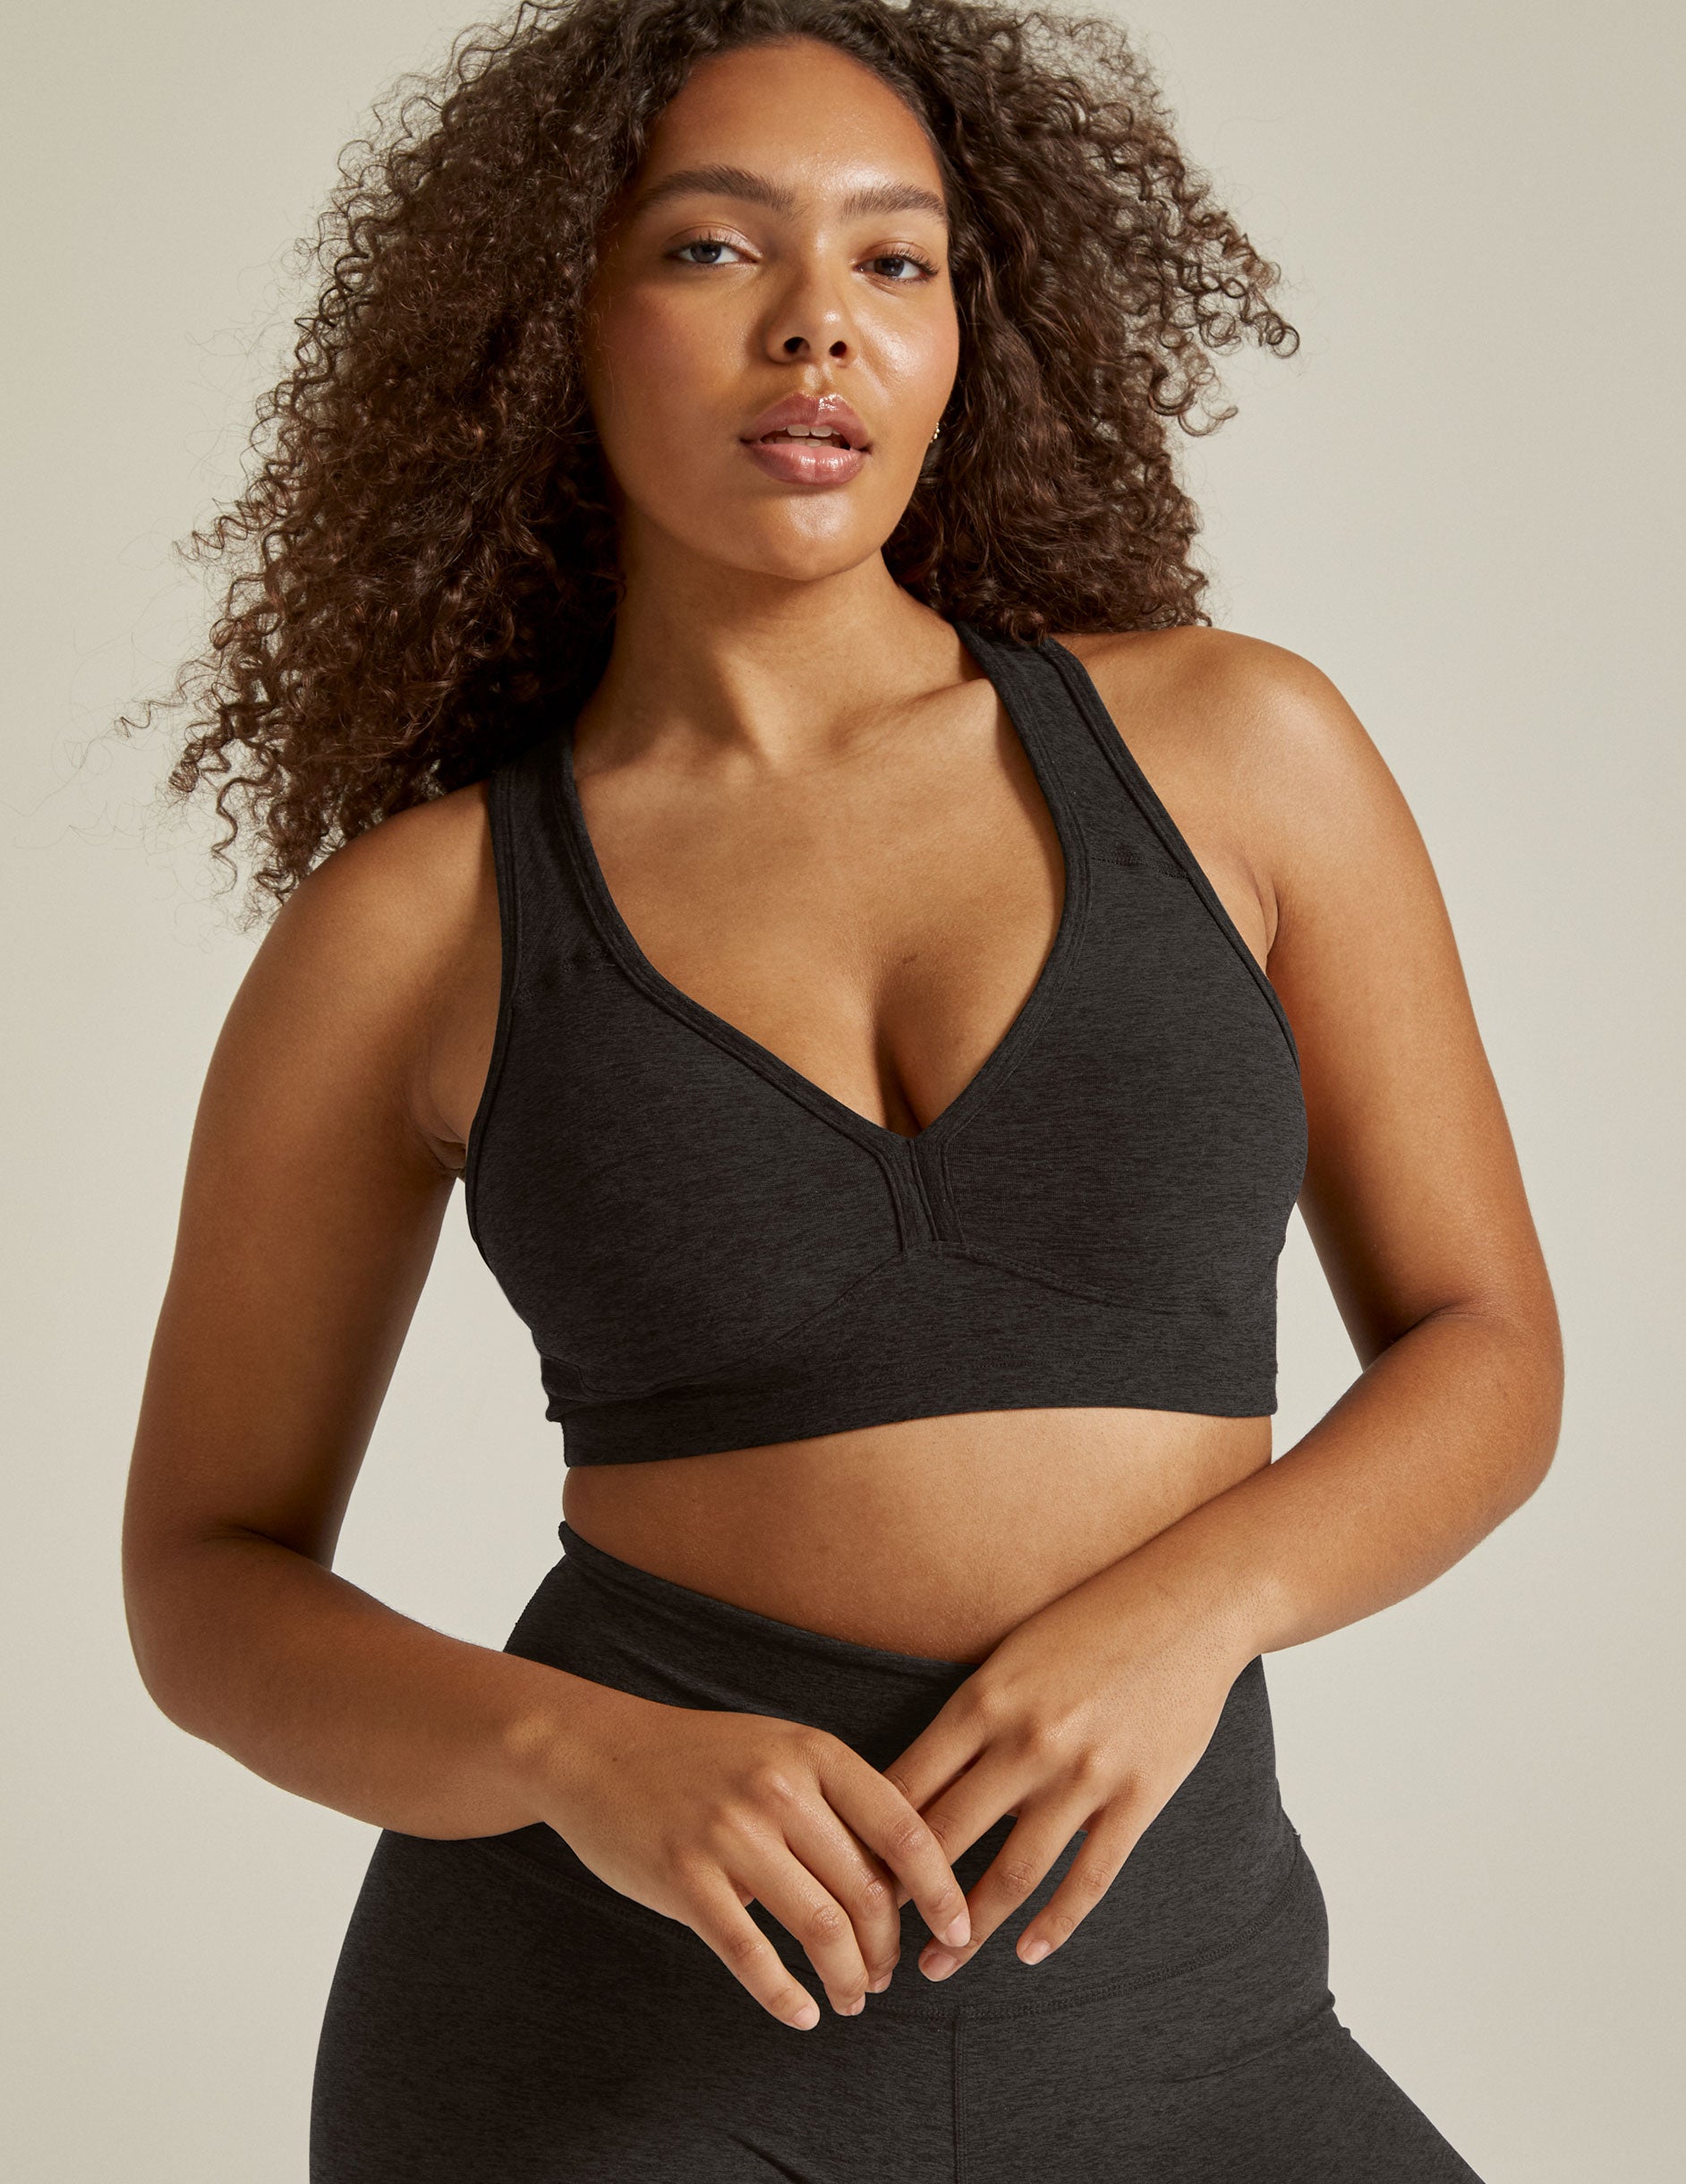 BEYOND SPORTS BRA - THE ULTIMATE MAXIMUM SUPPORT + MAX COVERAGE